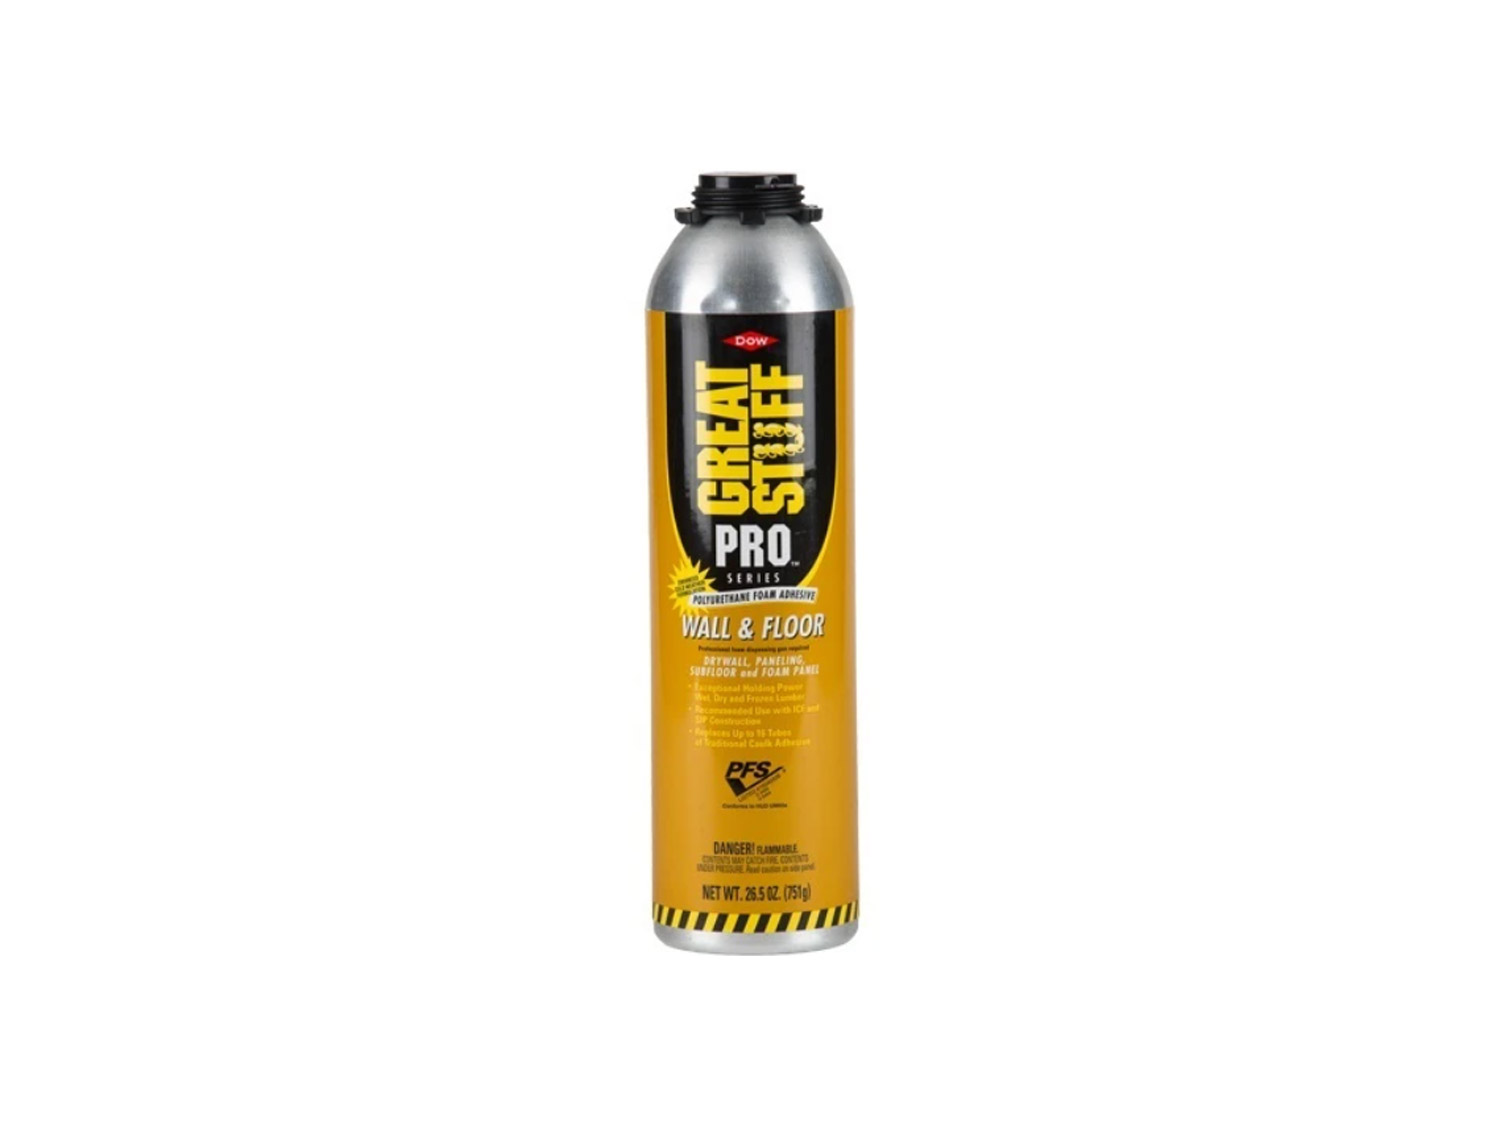 Great Stuff Pro Foam Cleaner, Case of 12 Cans